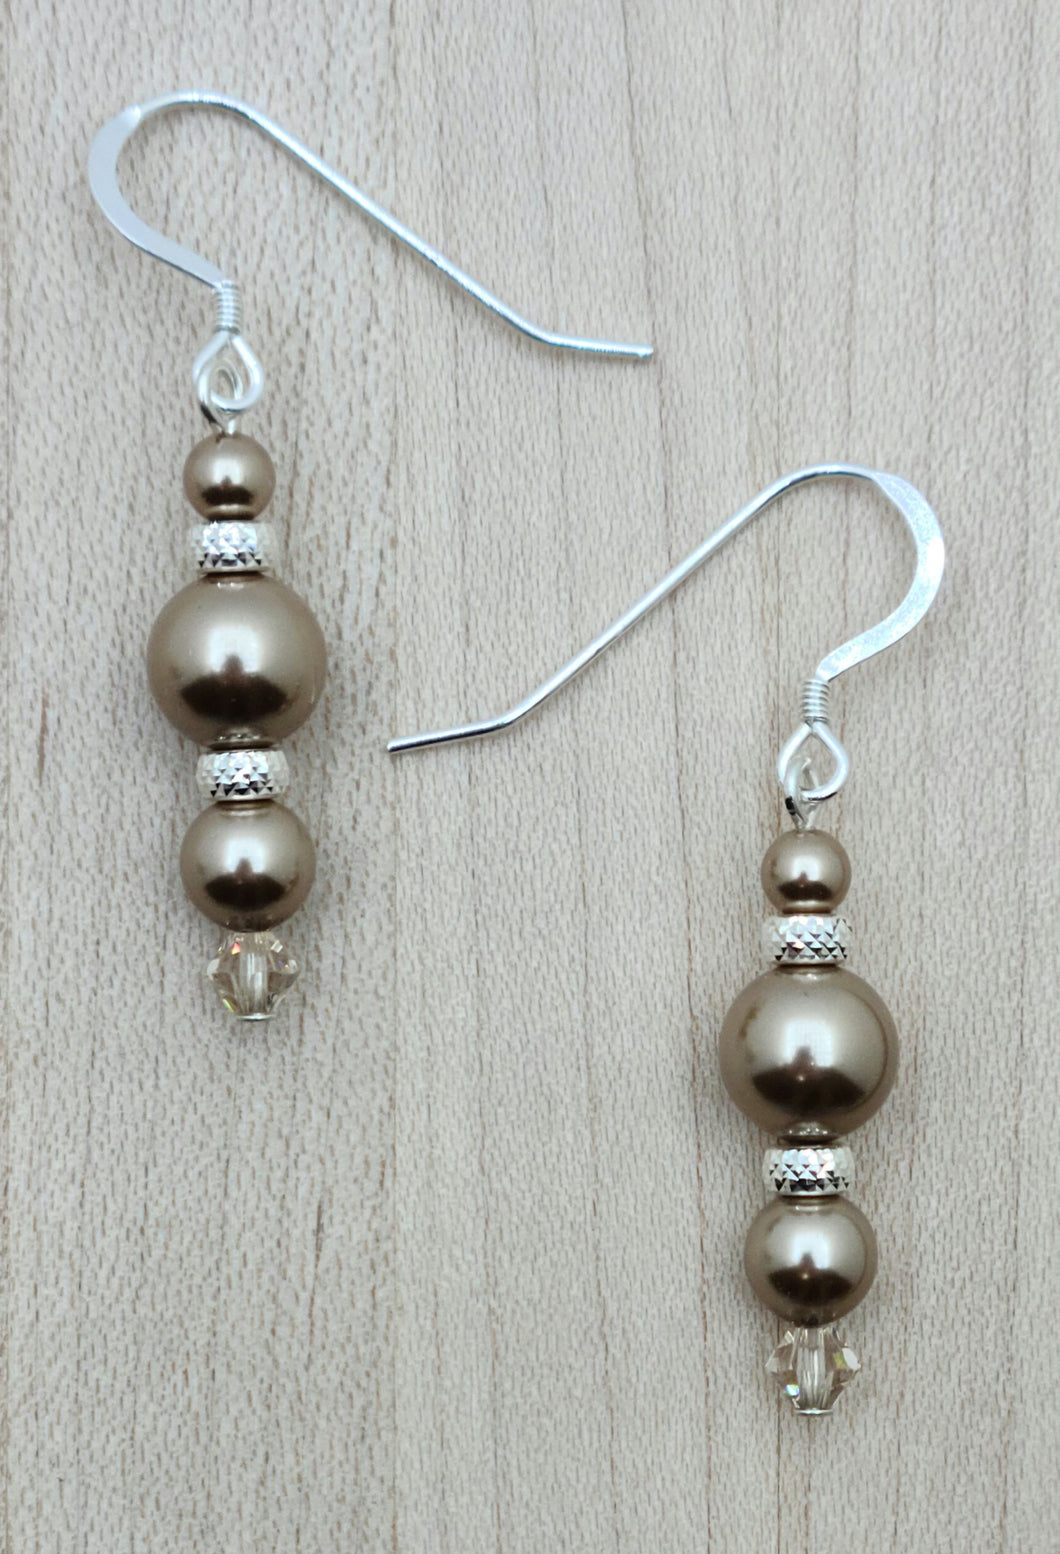 Beautiful bronze crystal pearls, pyramid cut sterling silver rondelles, & light silk crystals combine to create very elegant earrings!